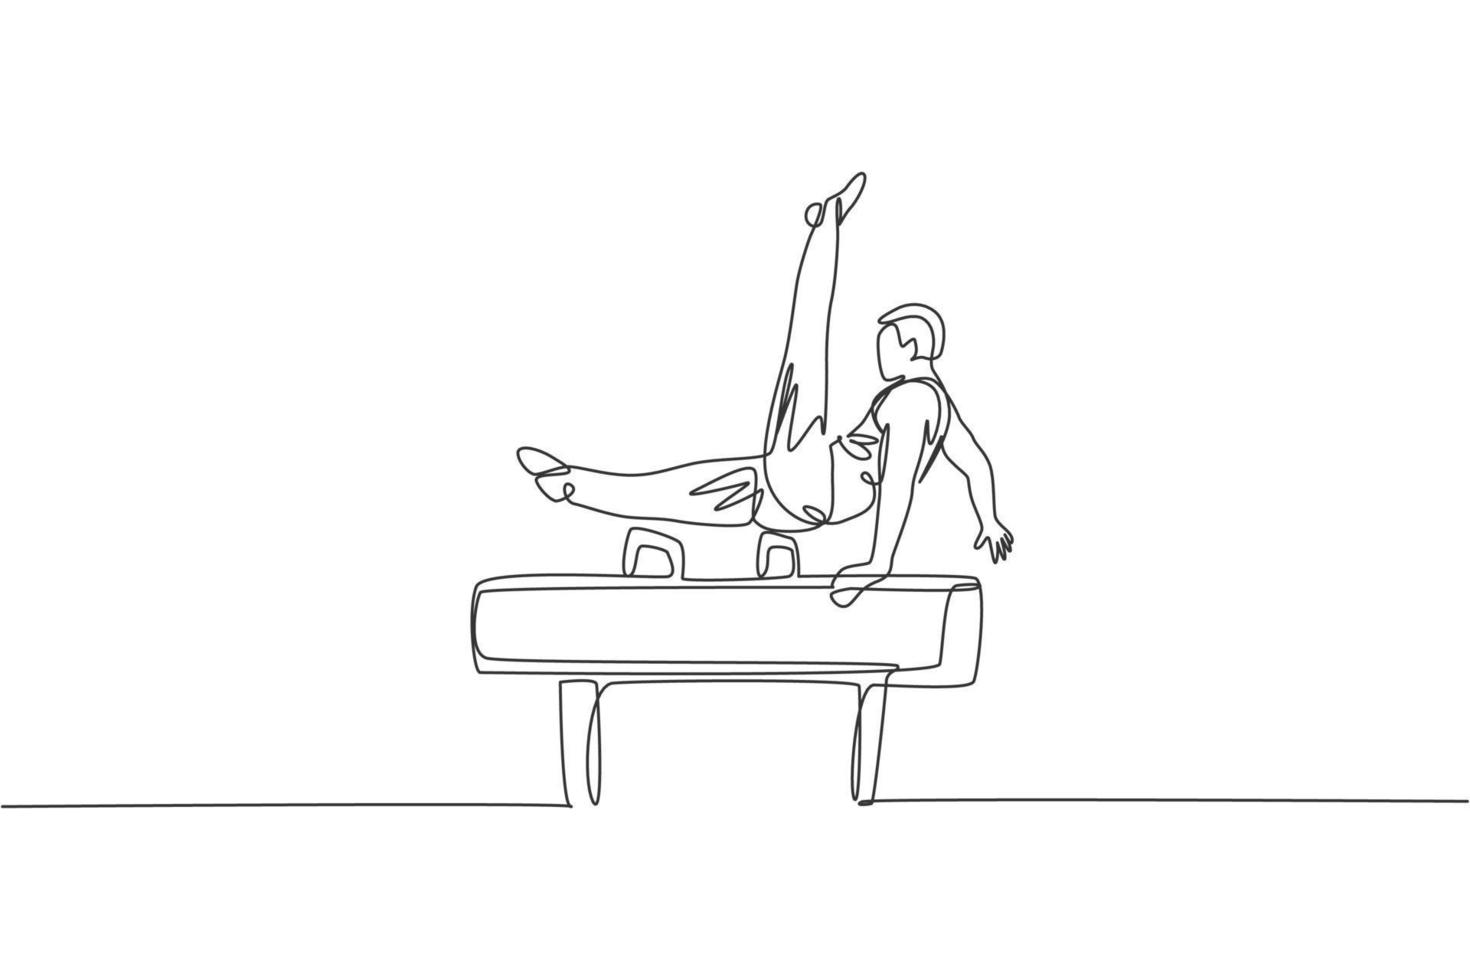 One single line drawing of young handsome gymnast man exercising pommel horse vector graphic illustration. Healthy lifestyle and athletic sport concept. Modern continuous line draw design